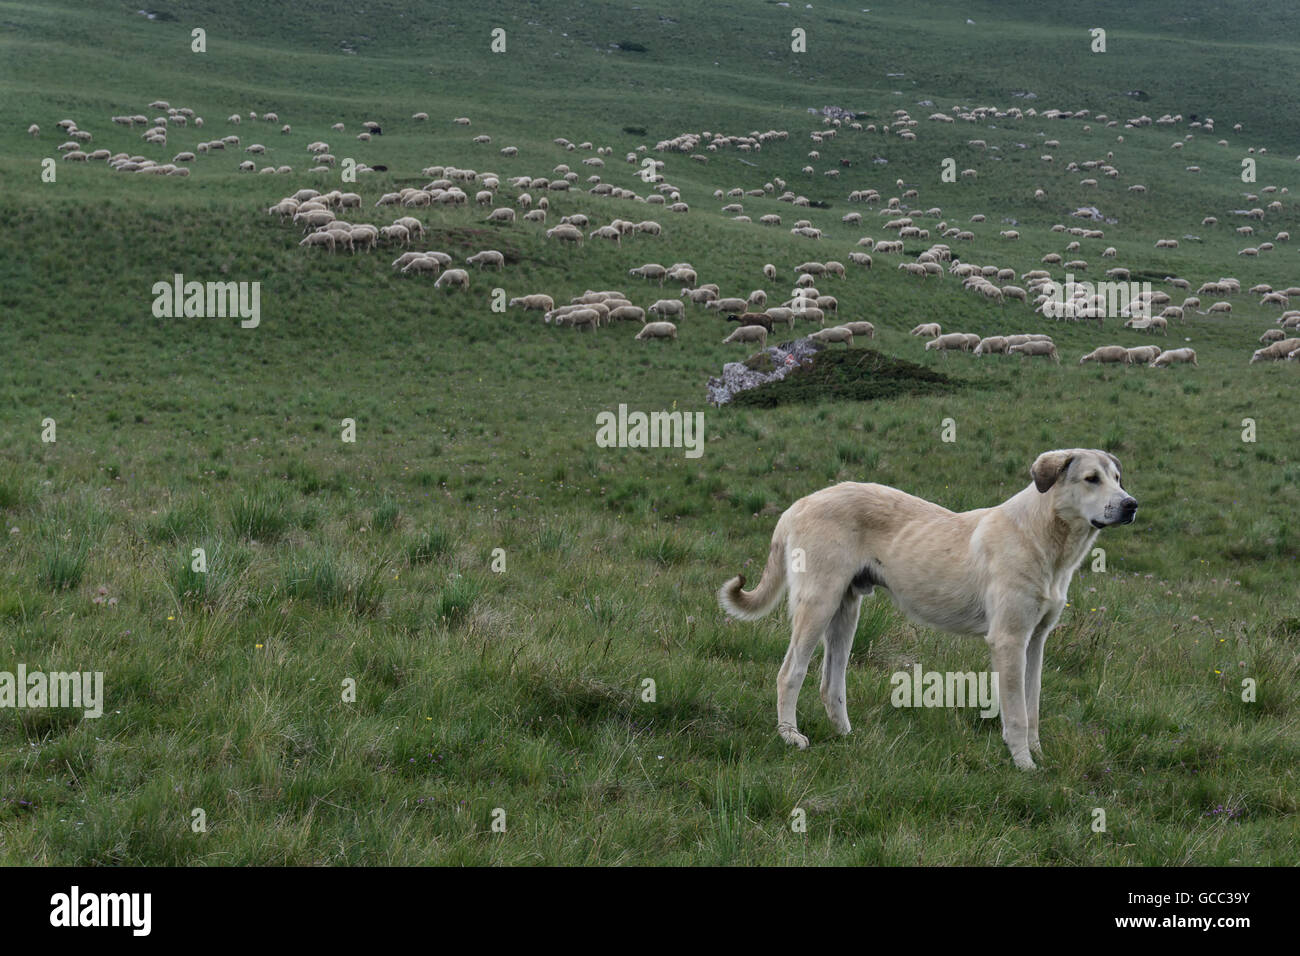 livestock guardian dog guarding a large flock of sheep in mountains Stock Photo